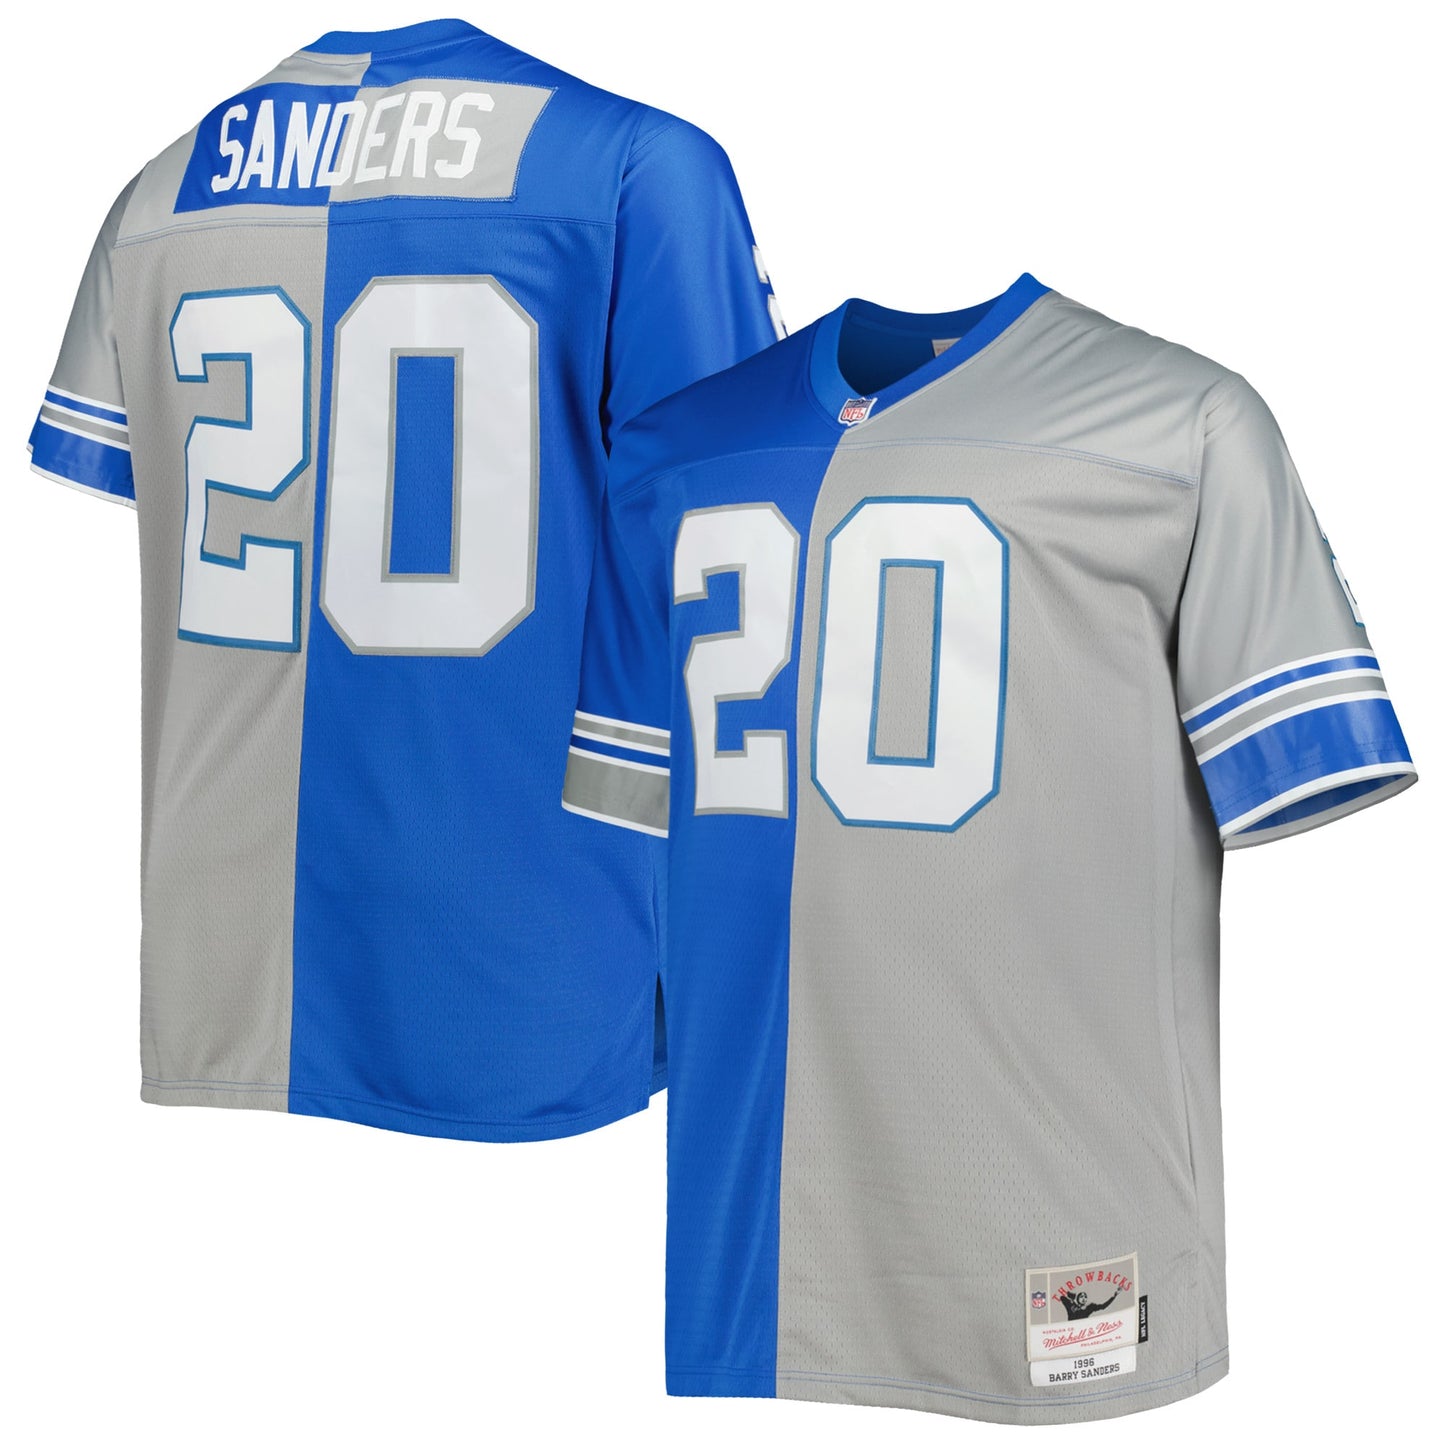 Barry Sanders Detroit Lions Mitchell & Ness Big & Tall Split Legacy Retired Player Replica Jersey - Blue/Silver